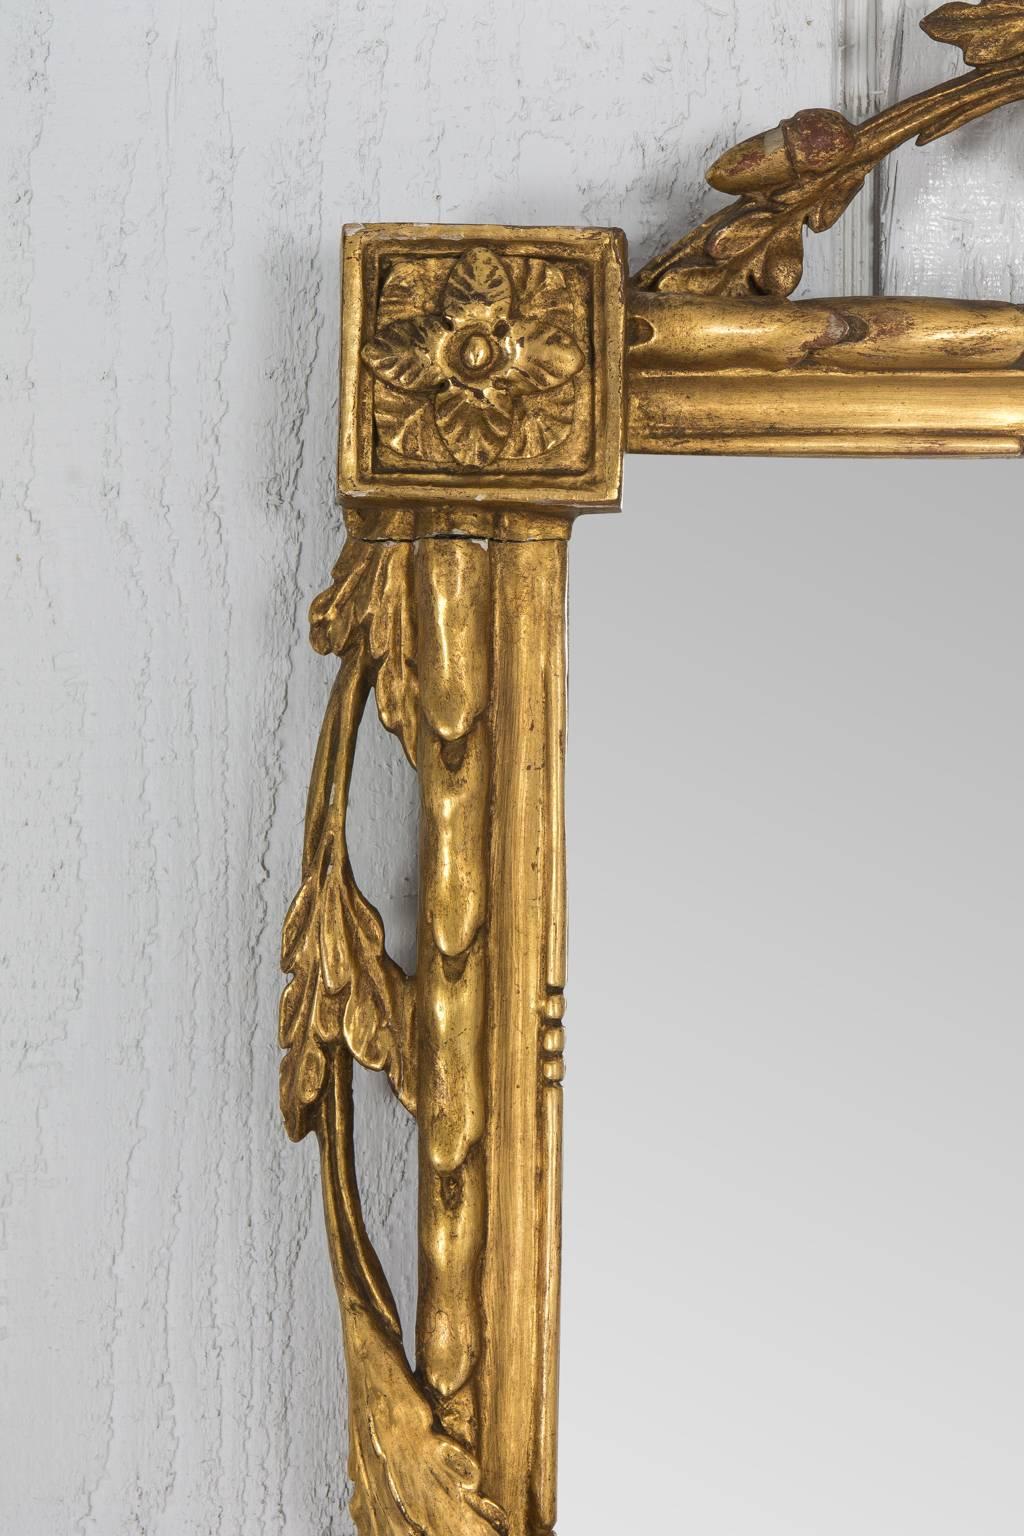 Gilded neoclassical mirror with crossed wheat pediment. On each corner is featured a carved rosette.